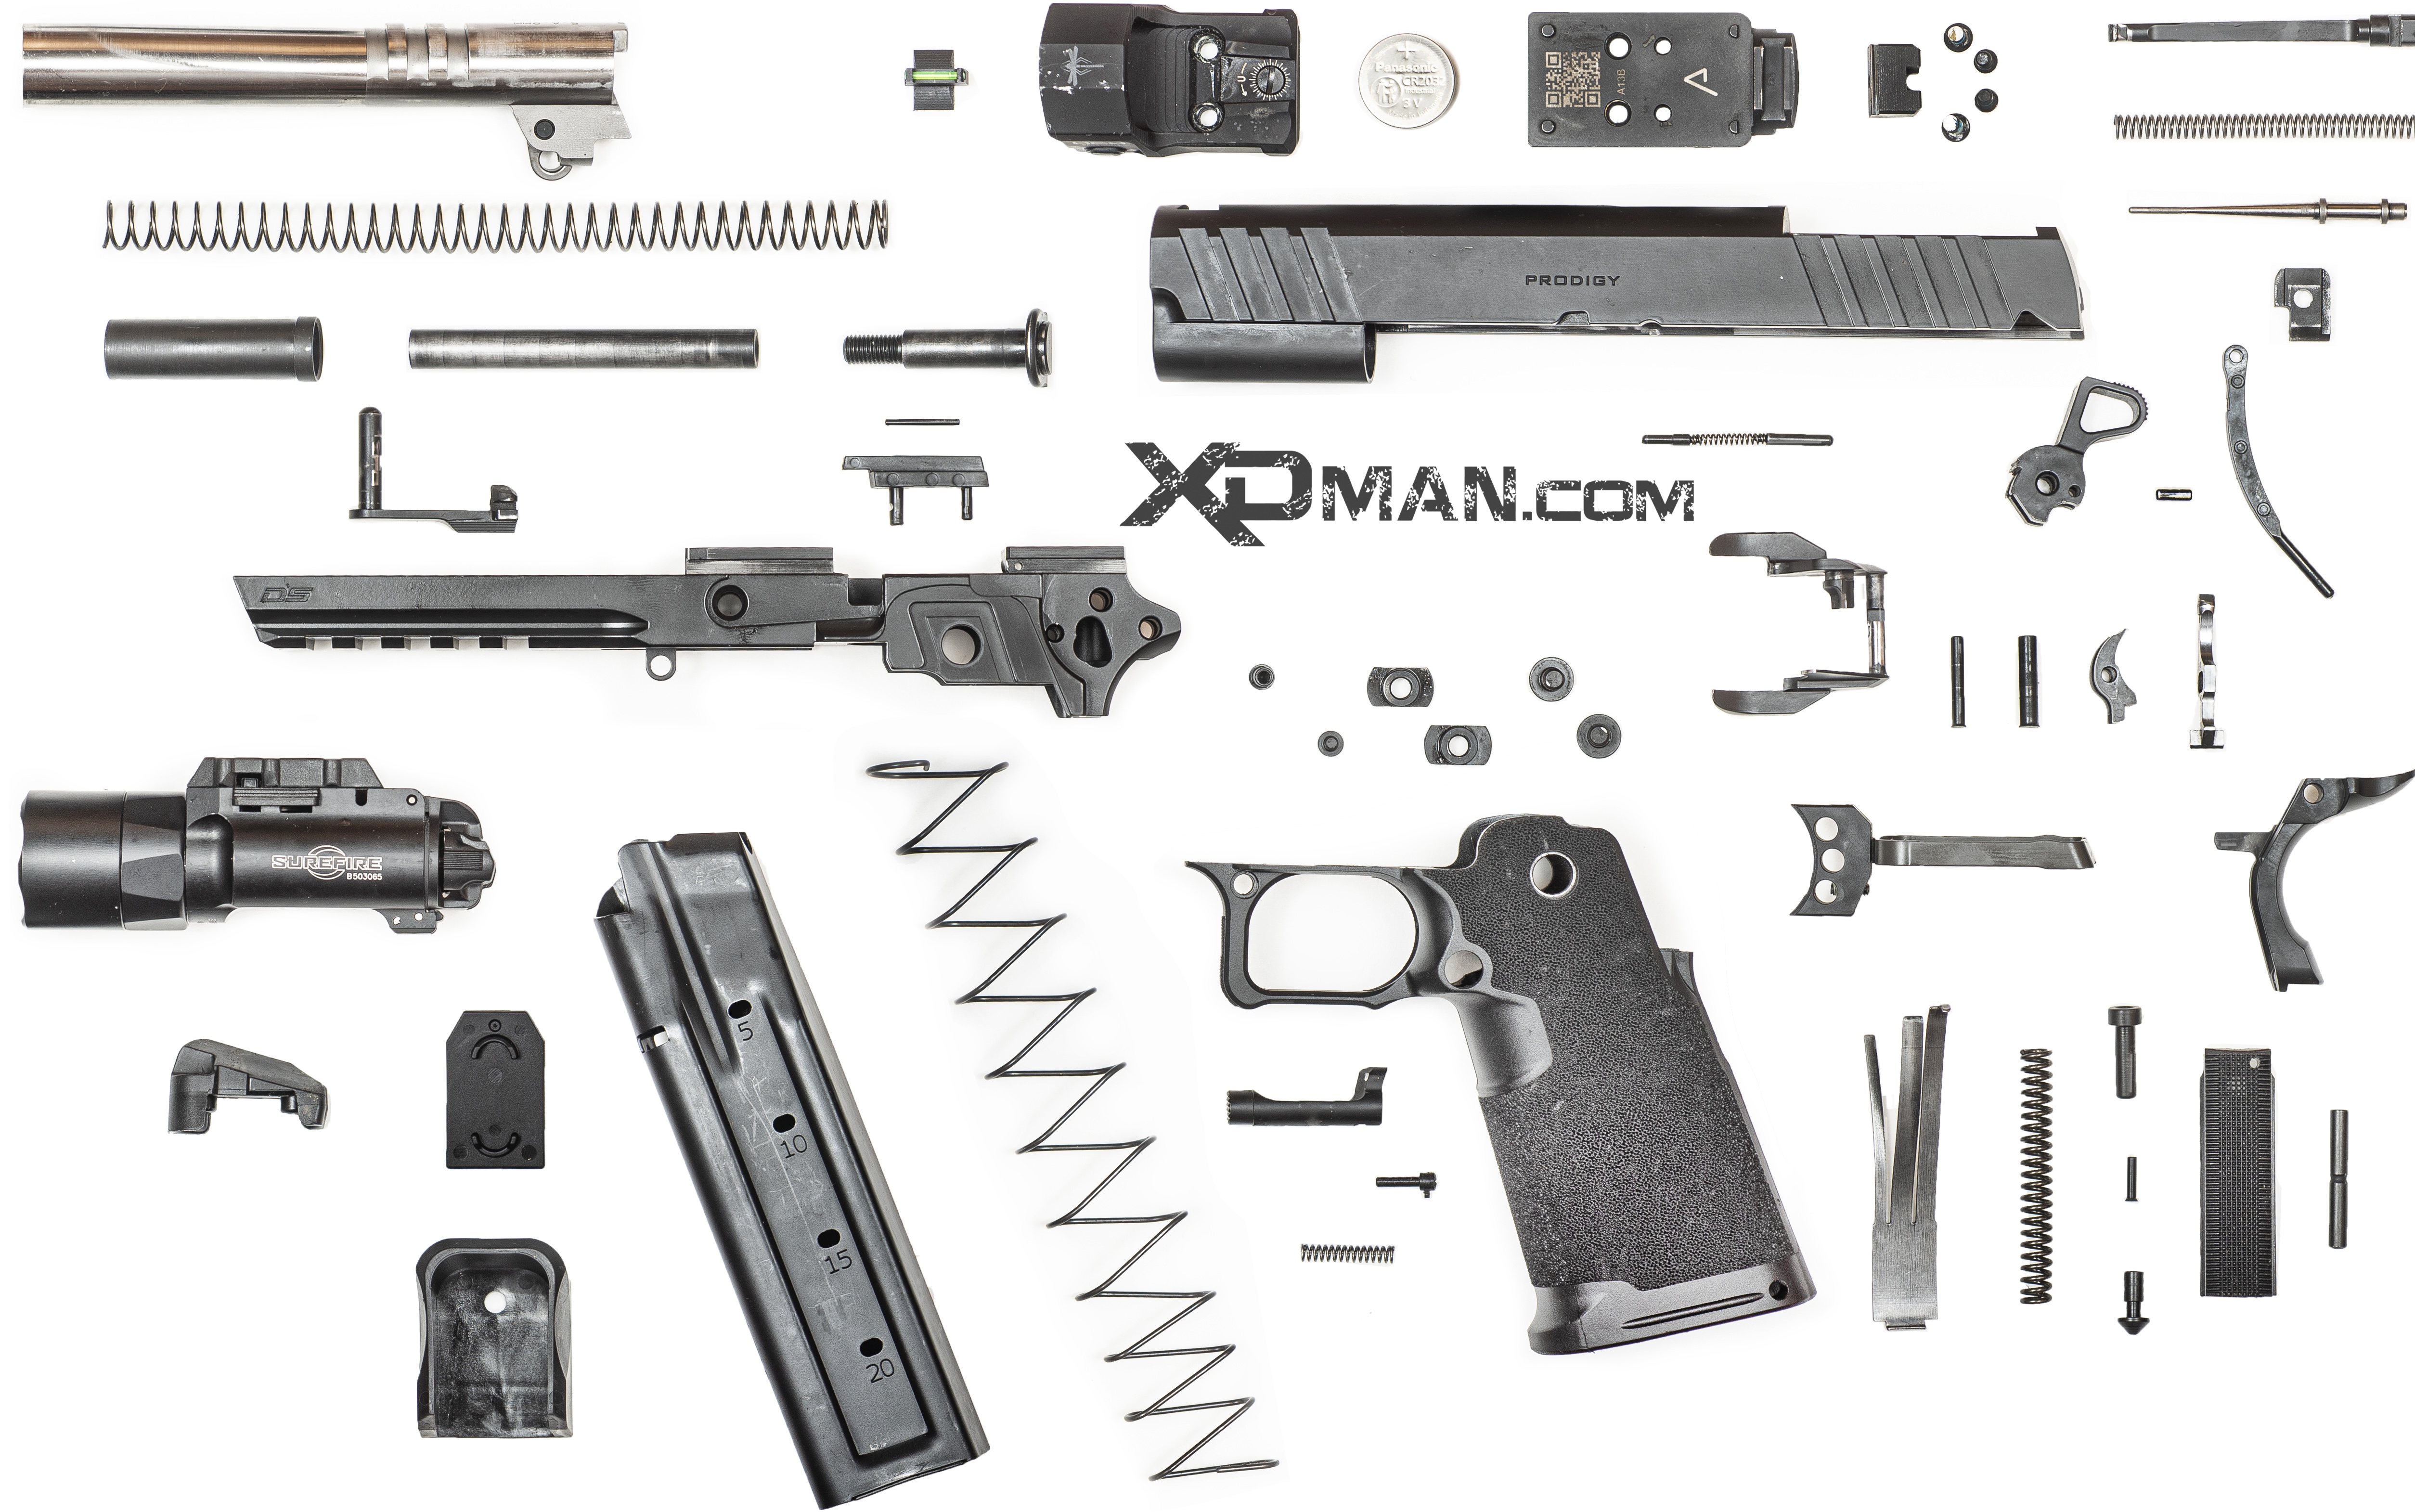 Glock 17: Complete disassembly